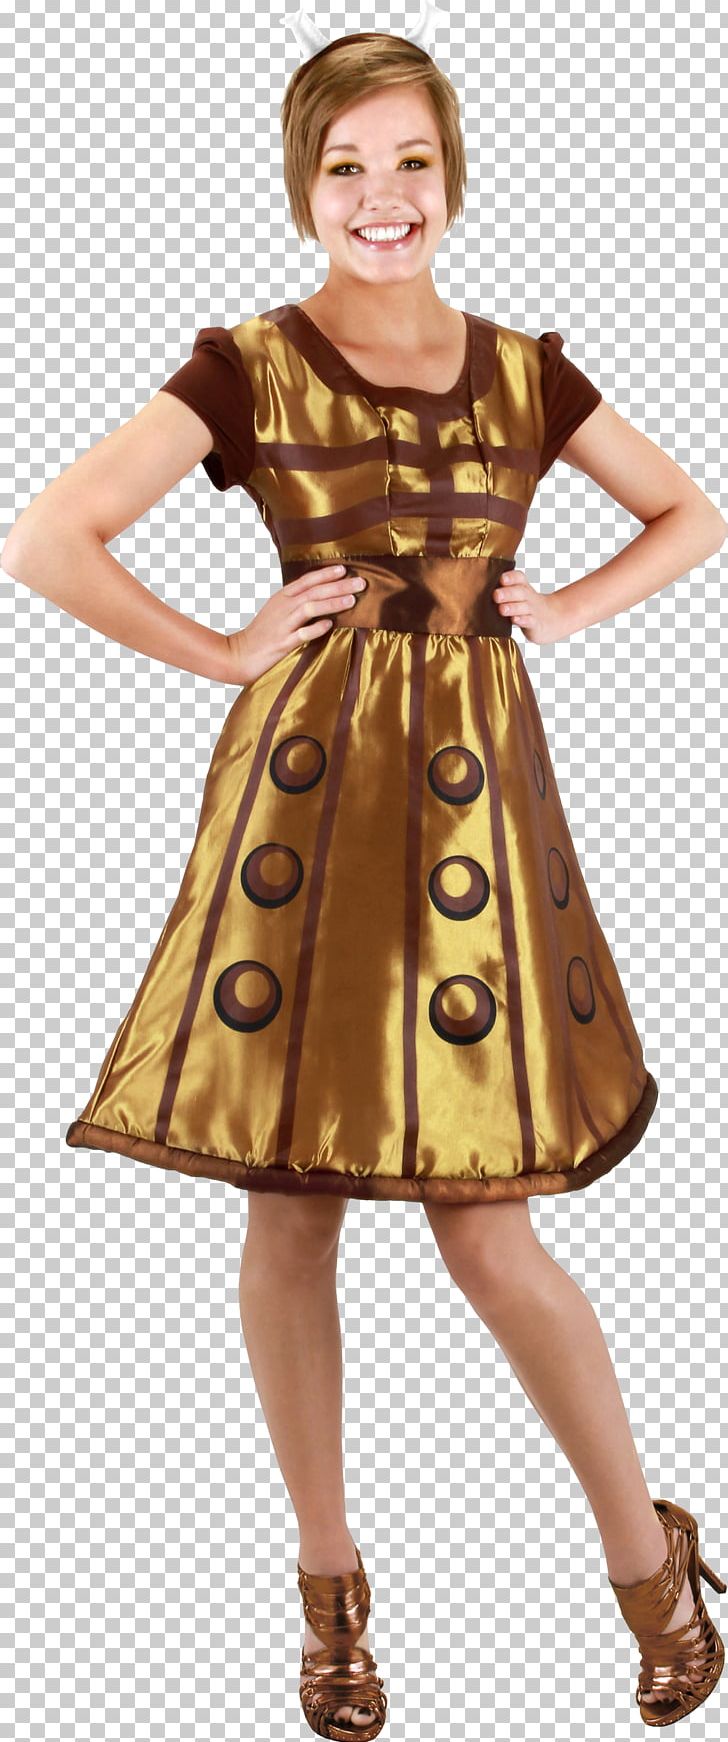 Doctor Who Dalek Costume Dress PNG, Clipart, Behind The Sofa, Clothing, Cocktail Dress, Costume, Costume Design Free PNG Download